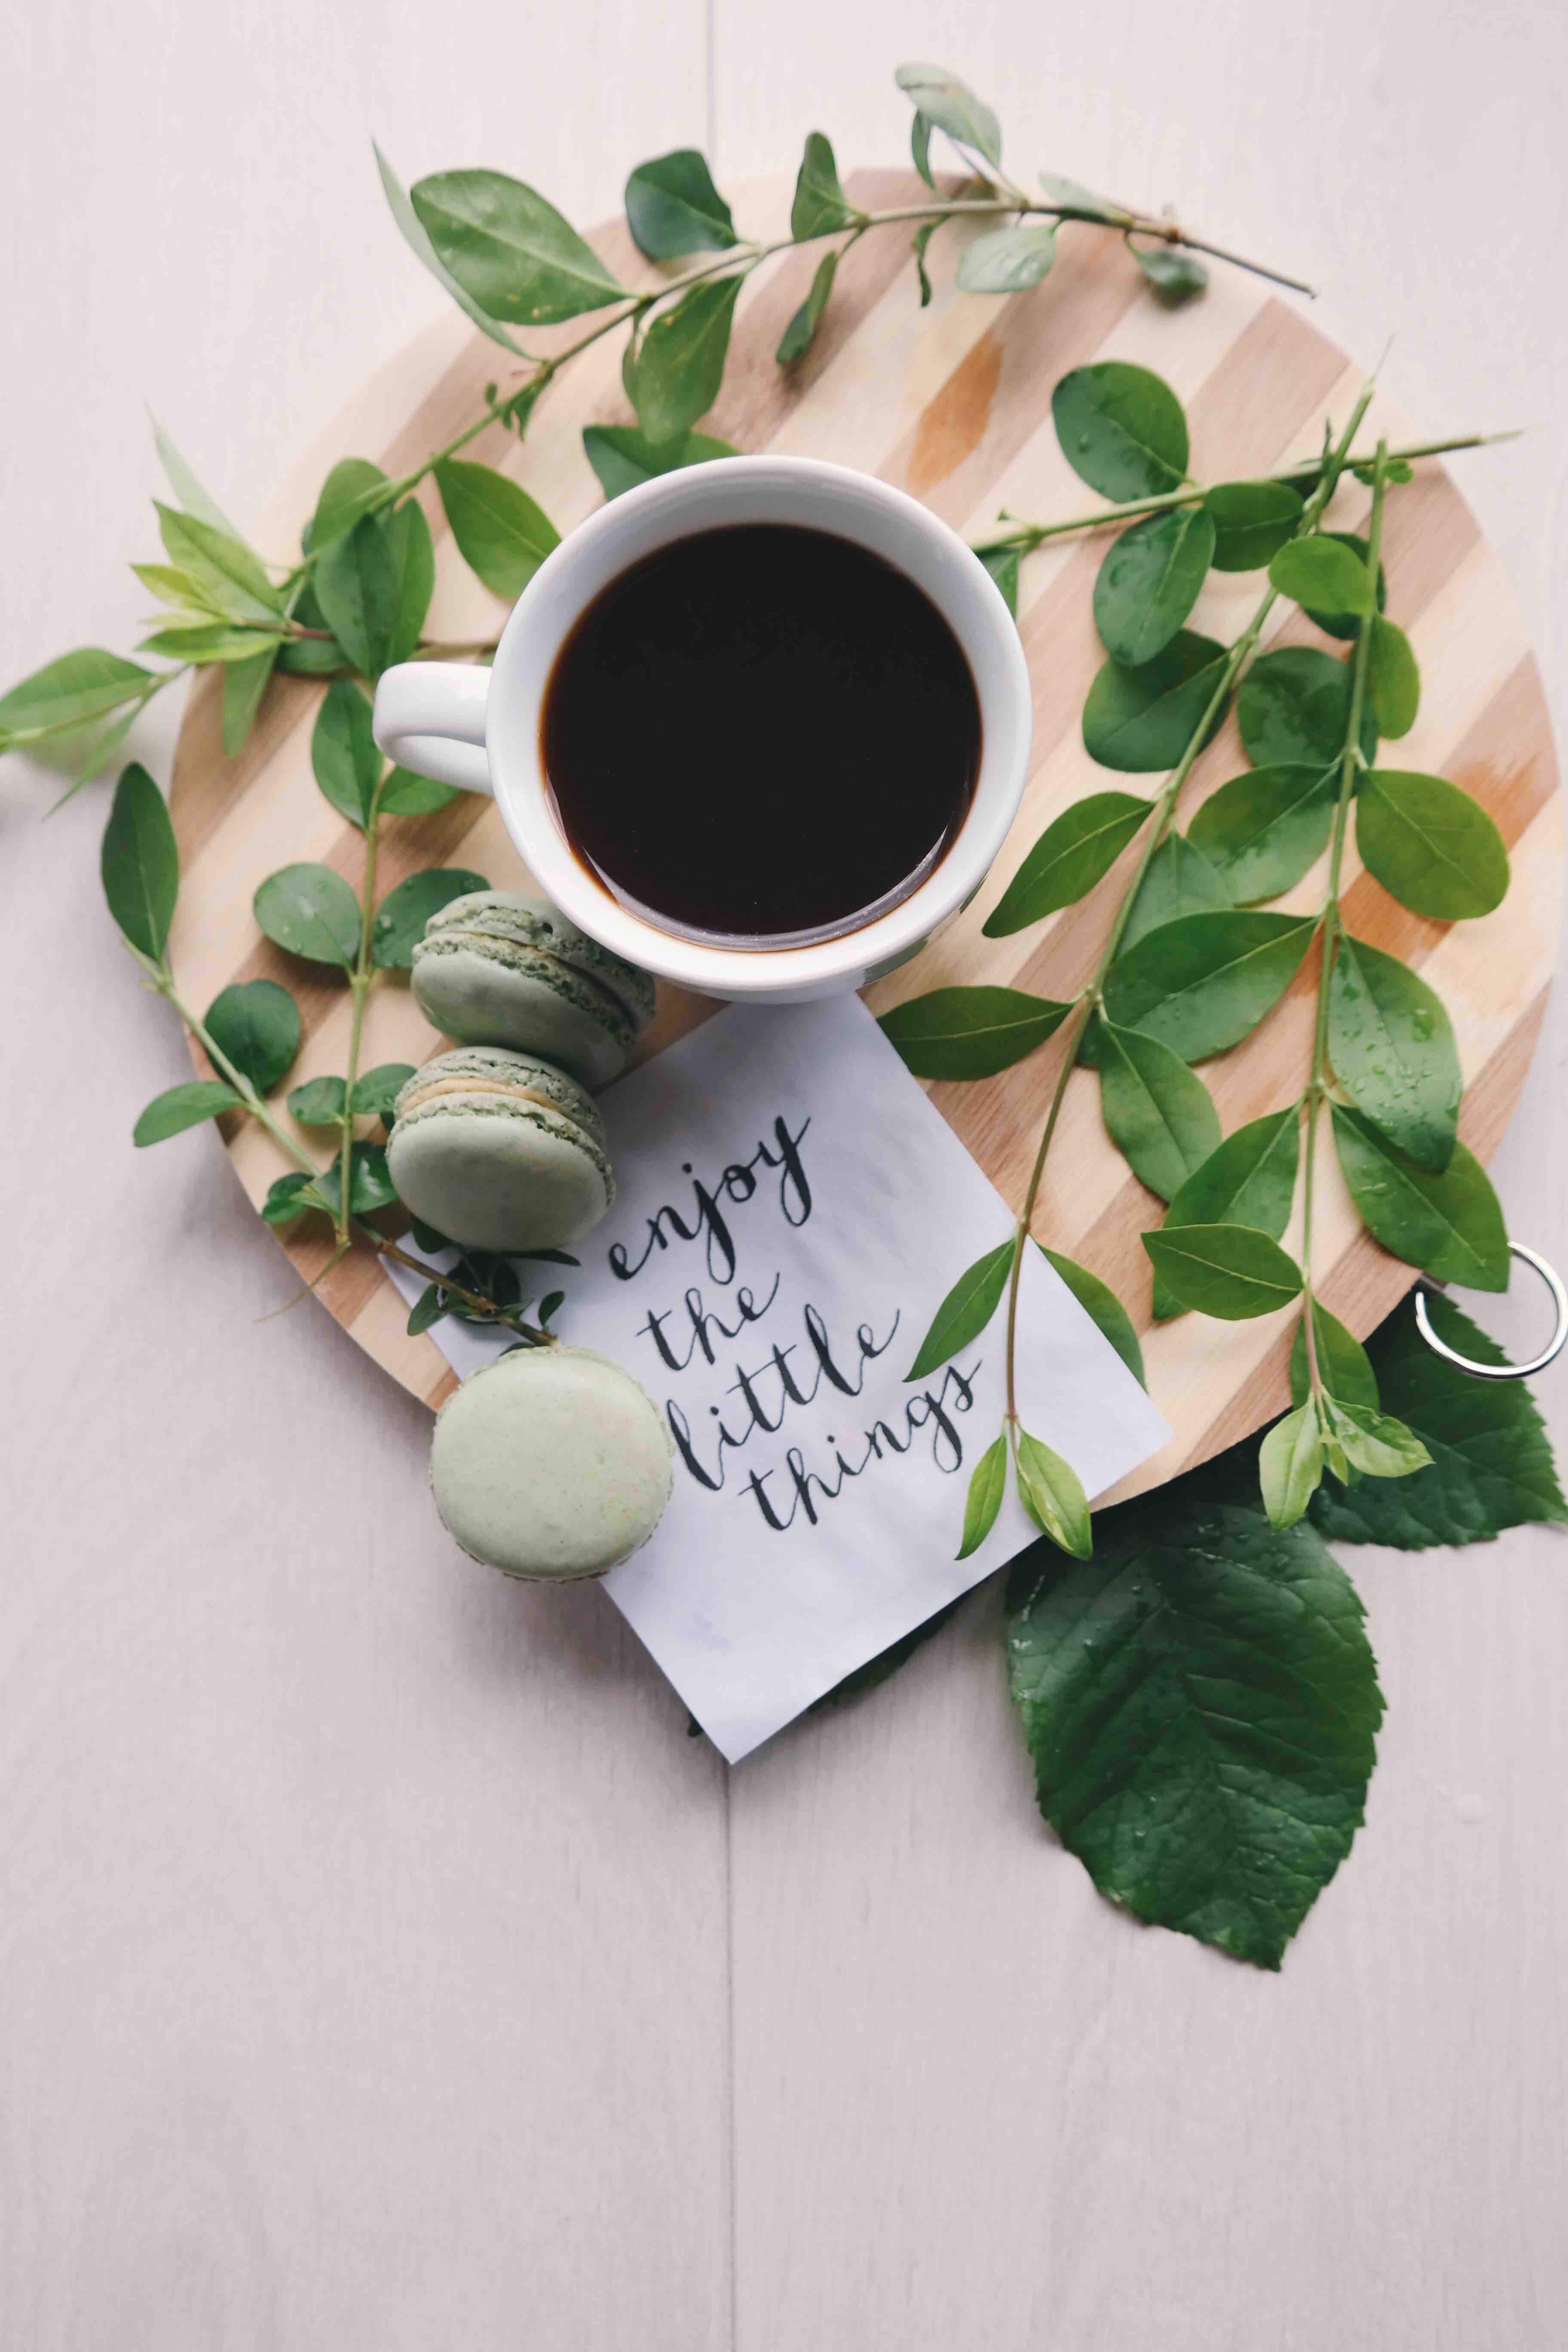 cup of coffee on a wood board, with green leaves, macarons and a napkin that says &quot;Enjoy the little things.&quot;